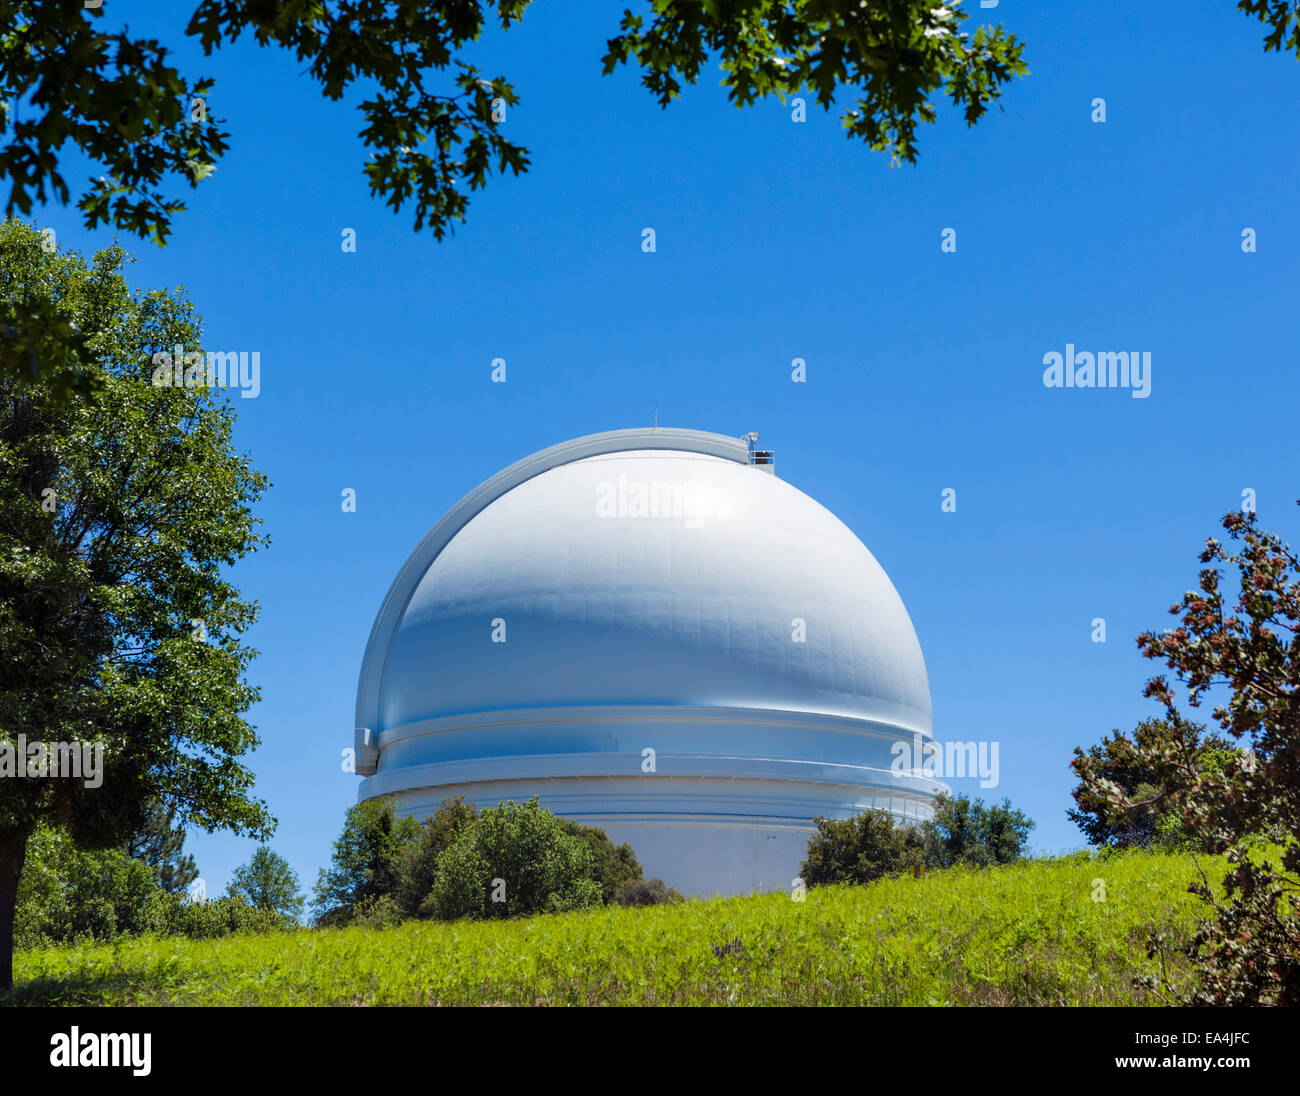 The dome of the 200 inch Hale Telescope at the Palomar Observatory, San Diego County, California, USA Stock Photo